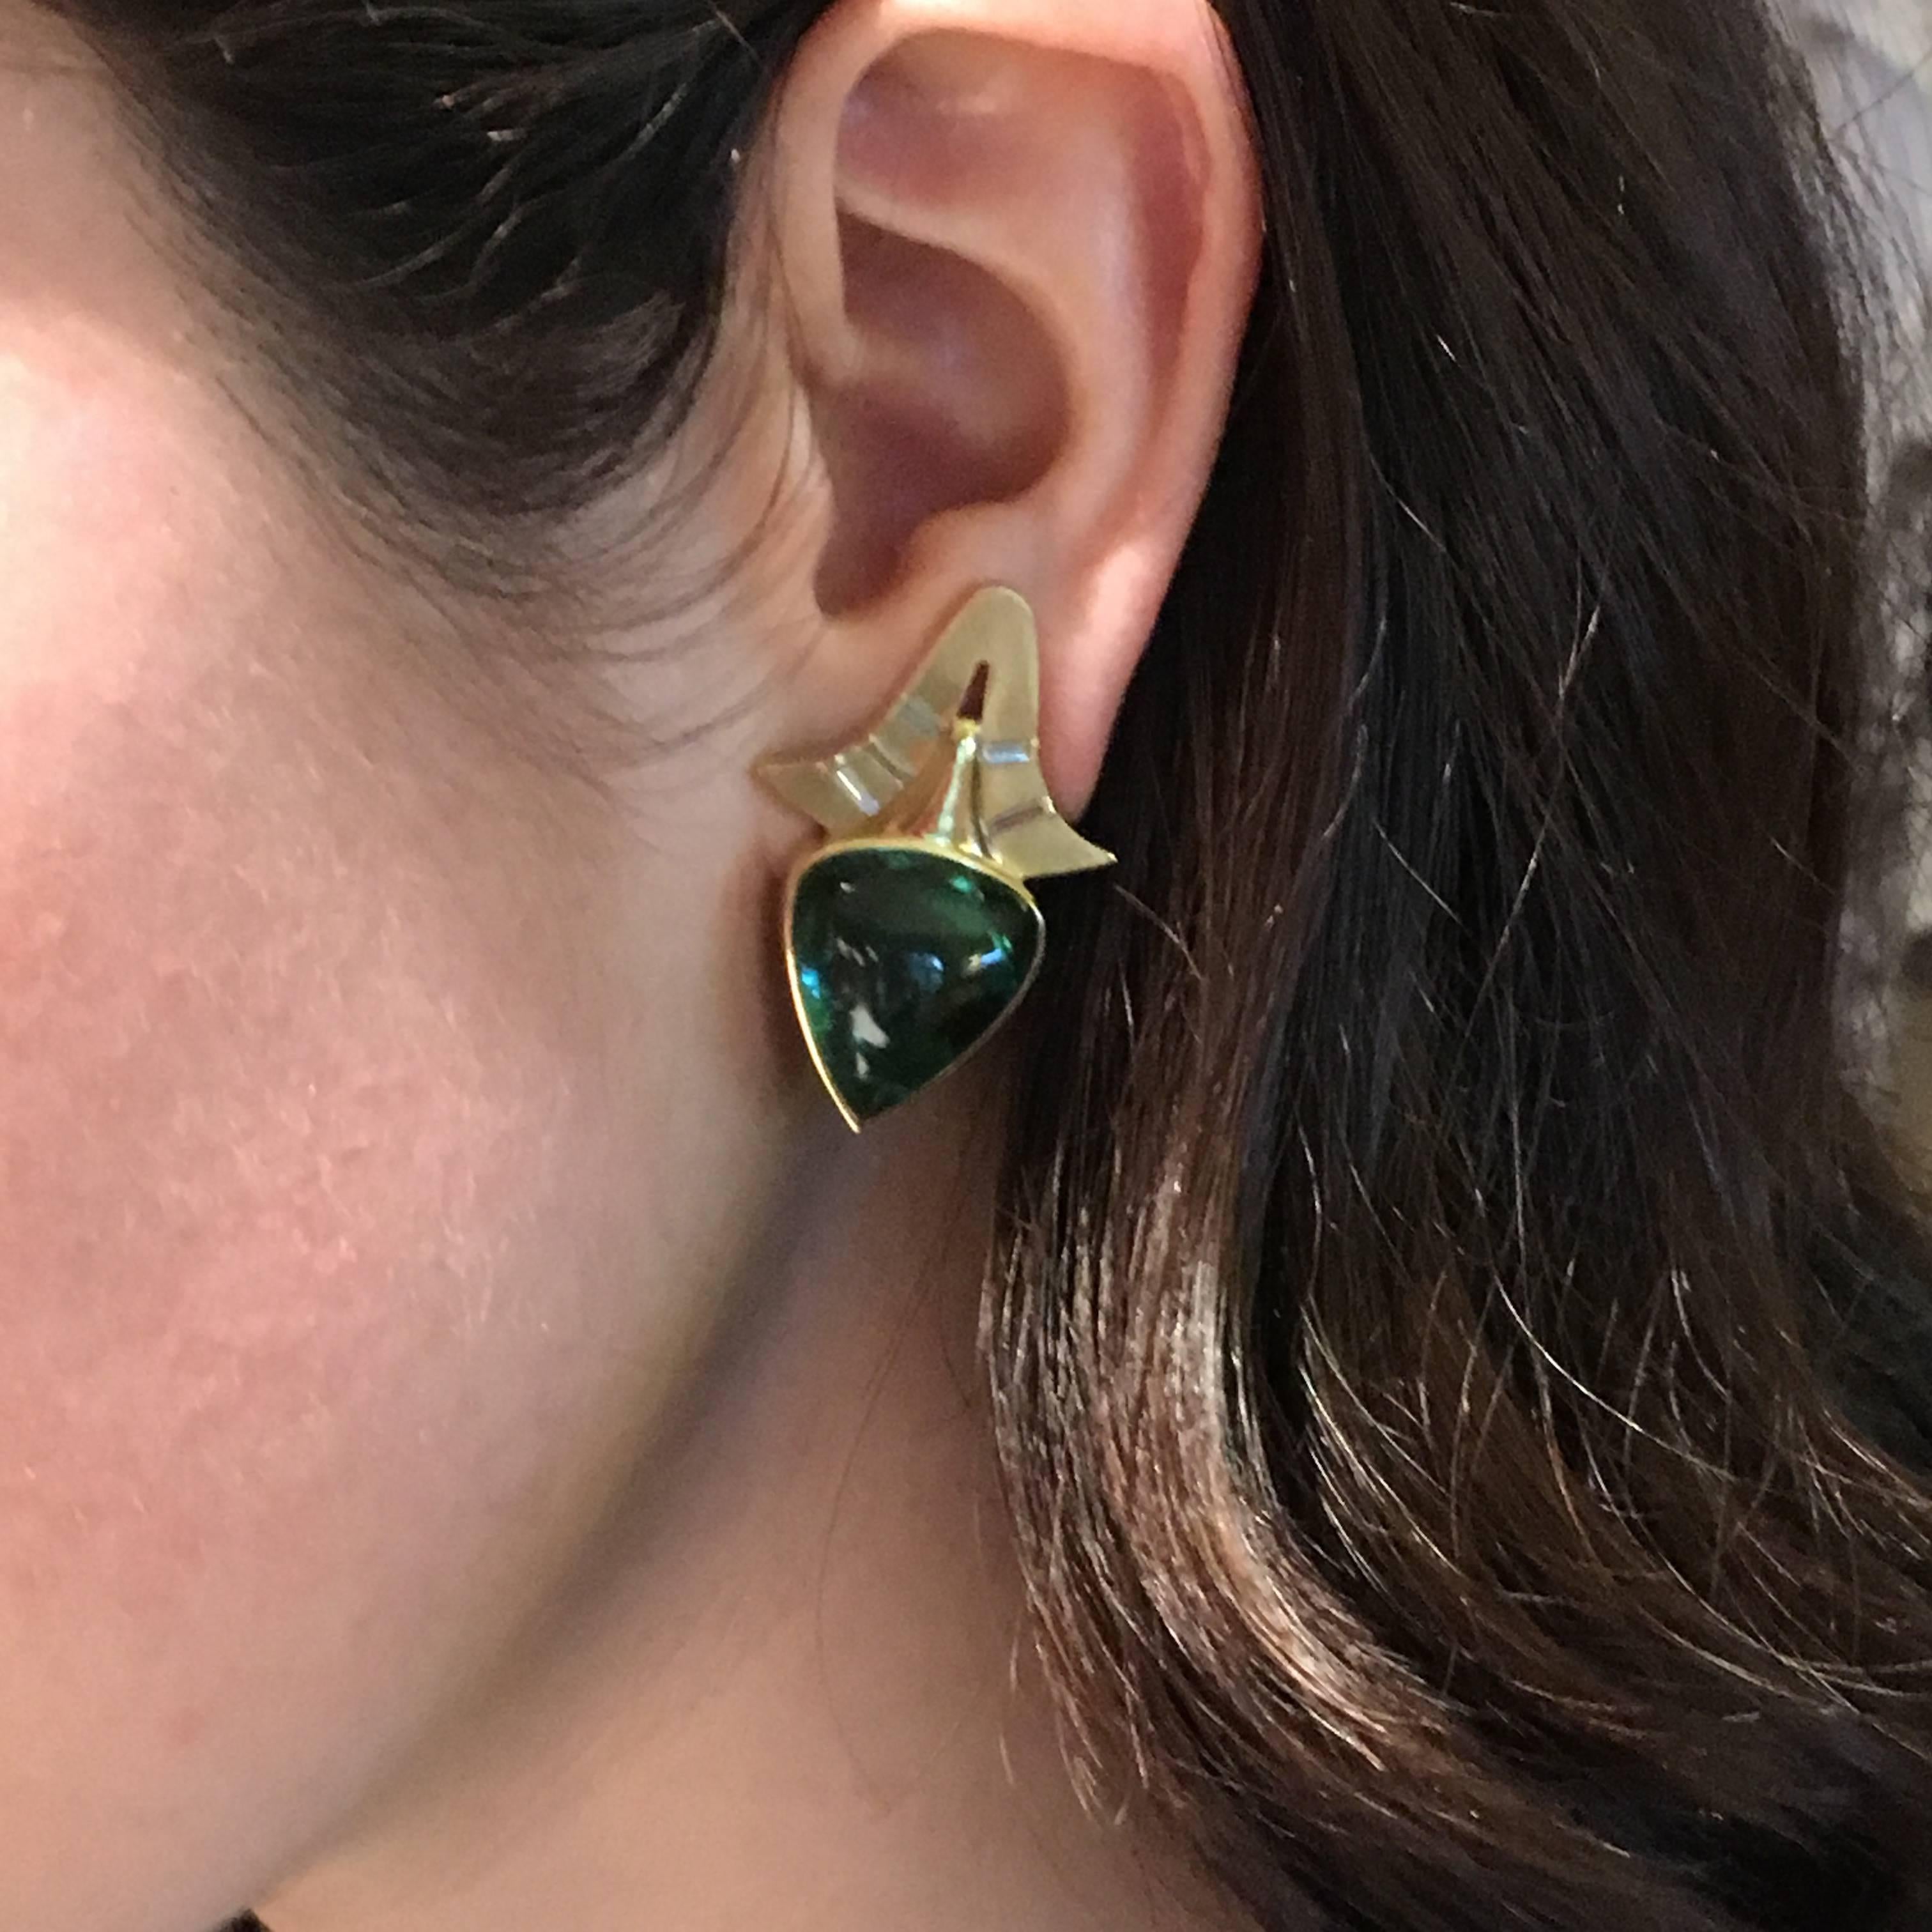 18ct yellow gold Dotaku earrings set with 29.64cts green tourmaline pear-shaped cabochons and 0.48ct baguette diamonds. The design developed from a drawing I made of a Japanese Buddhist bell, I was drawn to the elegant lines, negative shape,